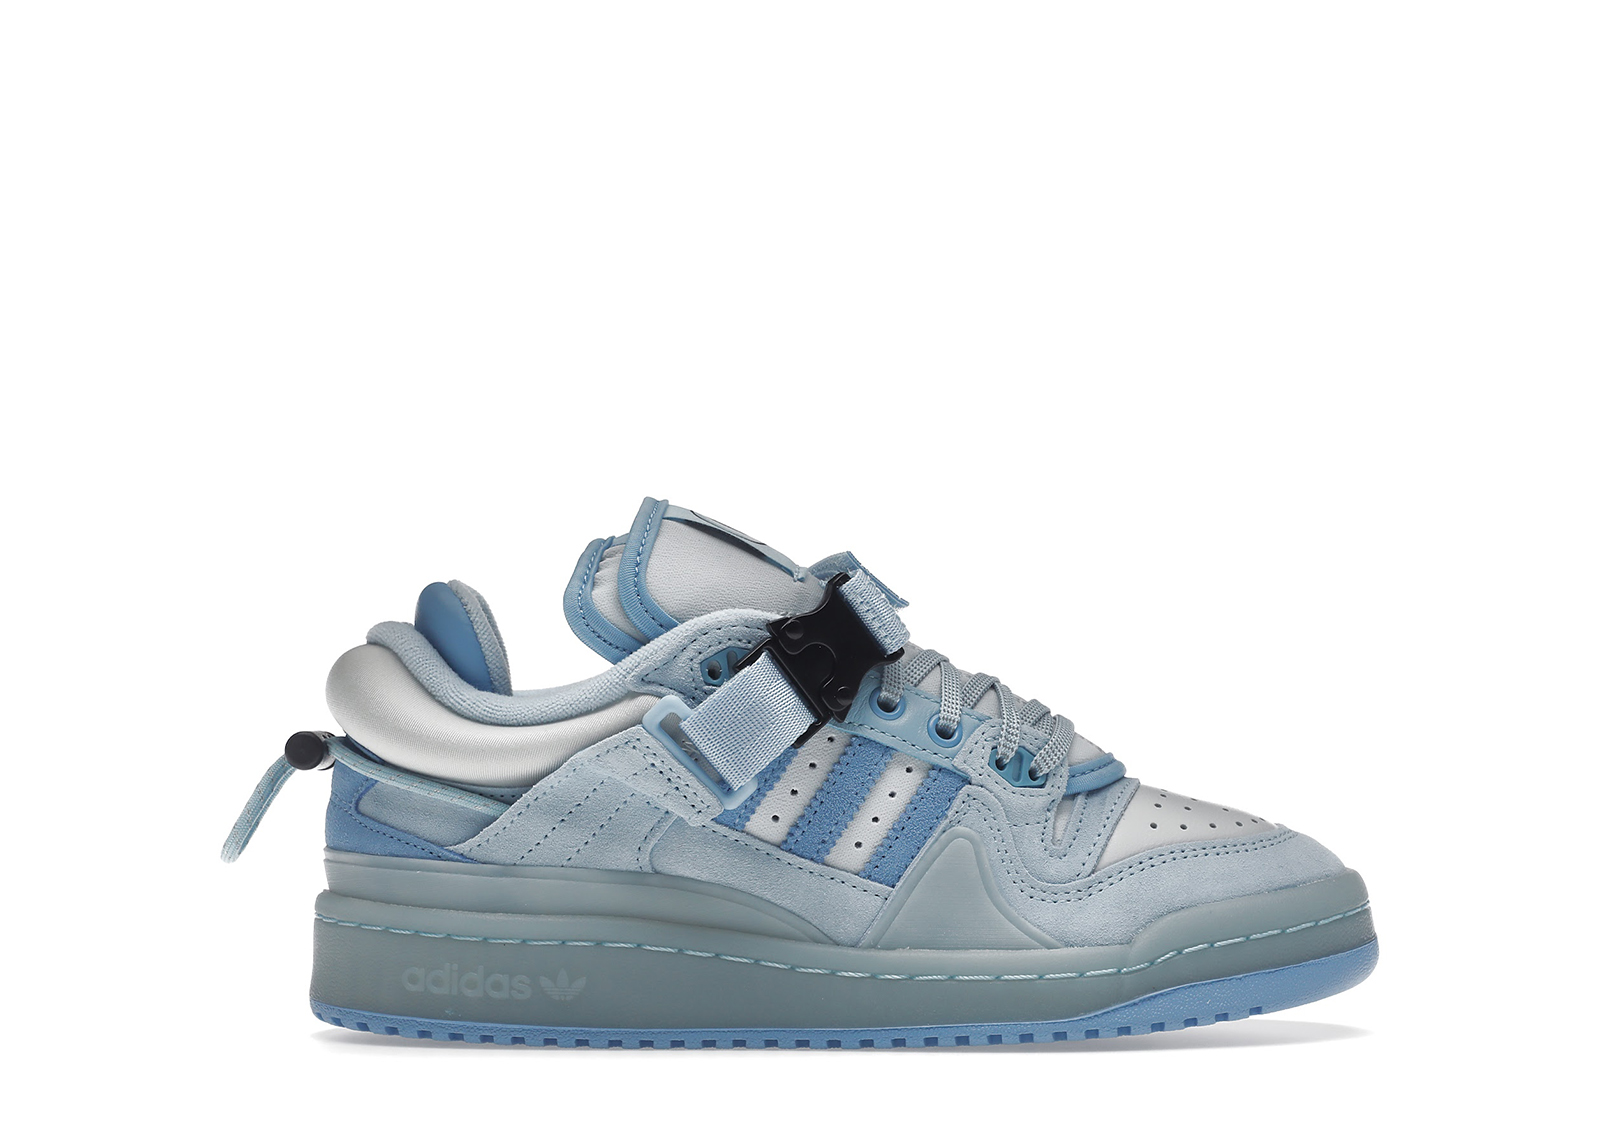 adidas Forum Buckle Low Bad Bunny Blue Tint (GS) キッズ - GY4900 - JP